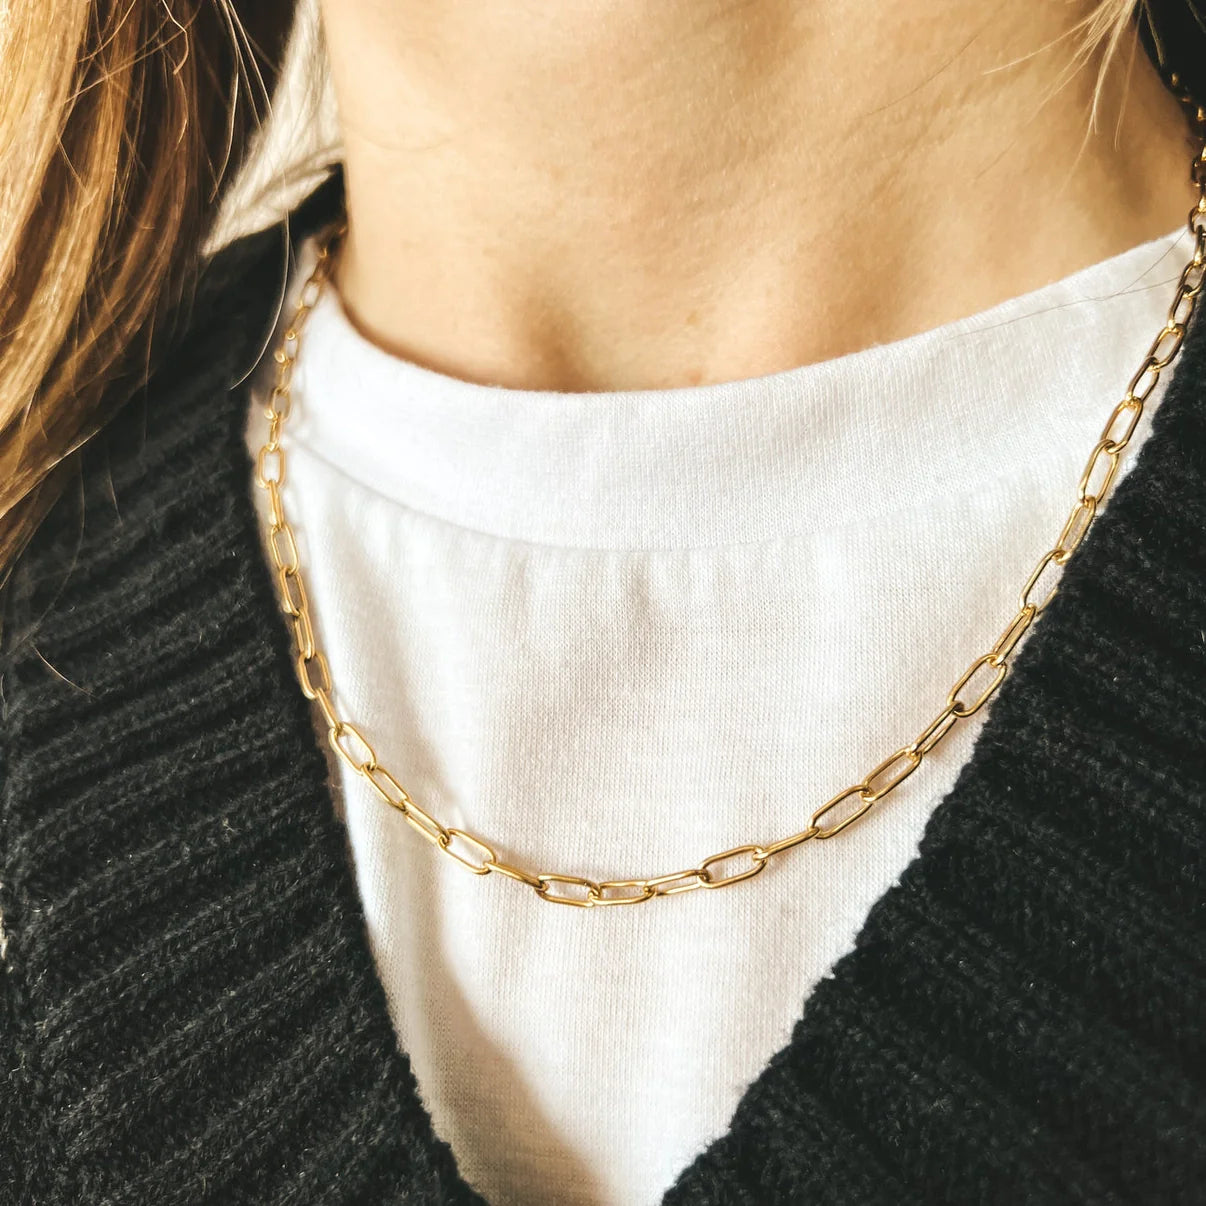 Female wearing golf Graffito chain necklace from Horace Jewellery